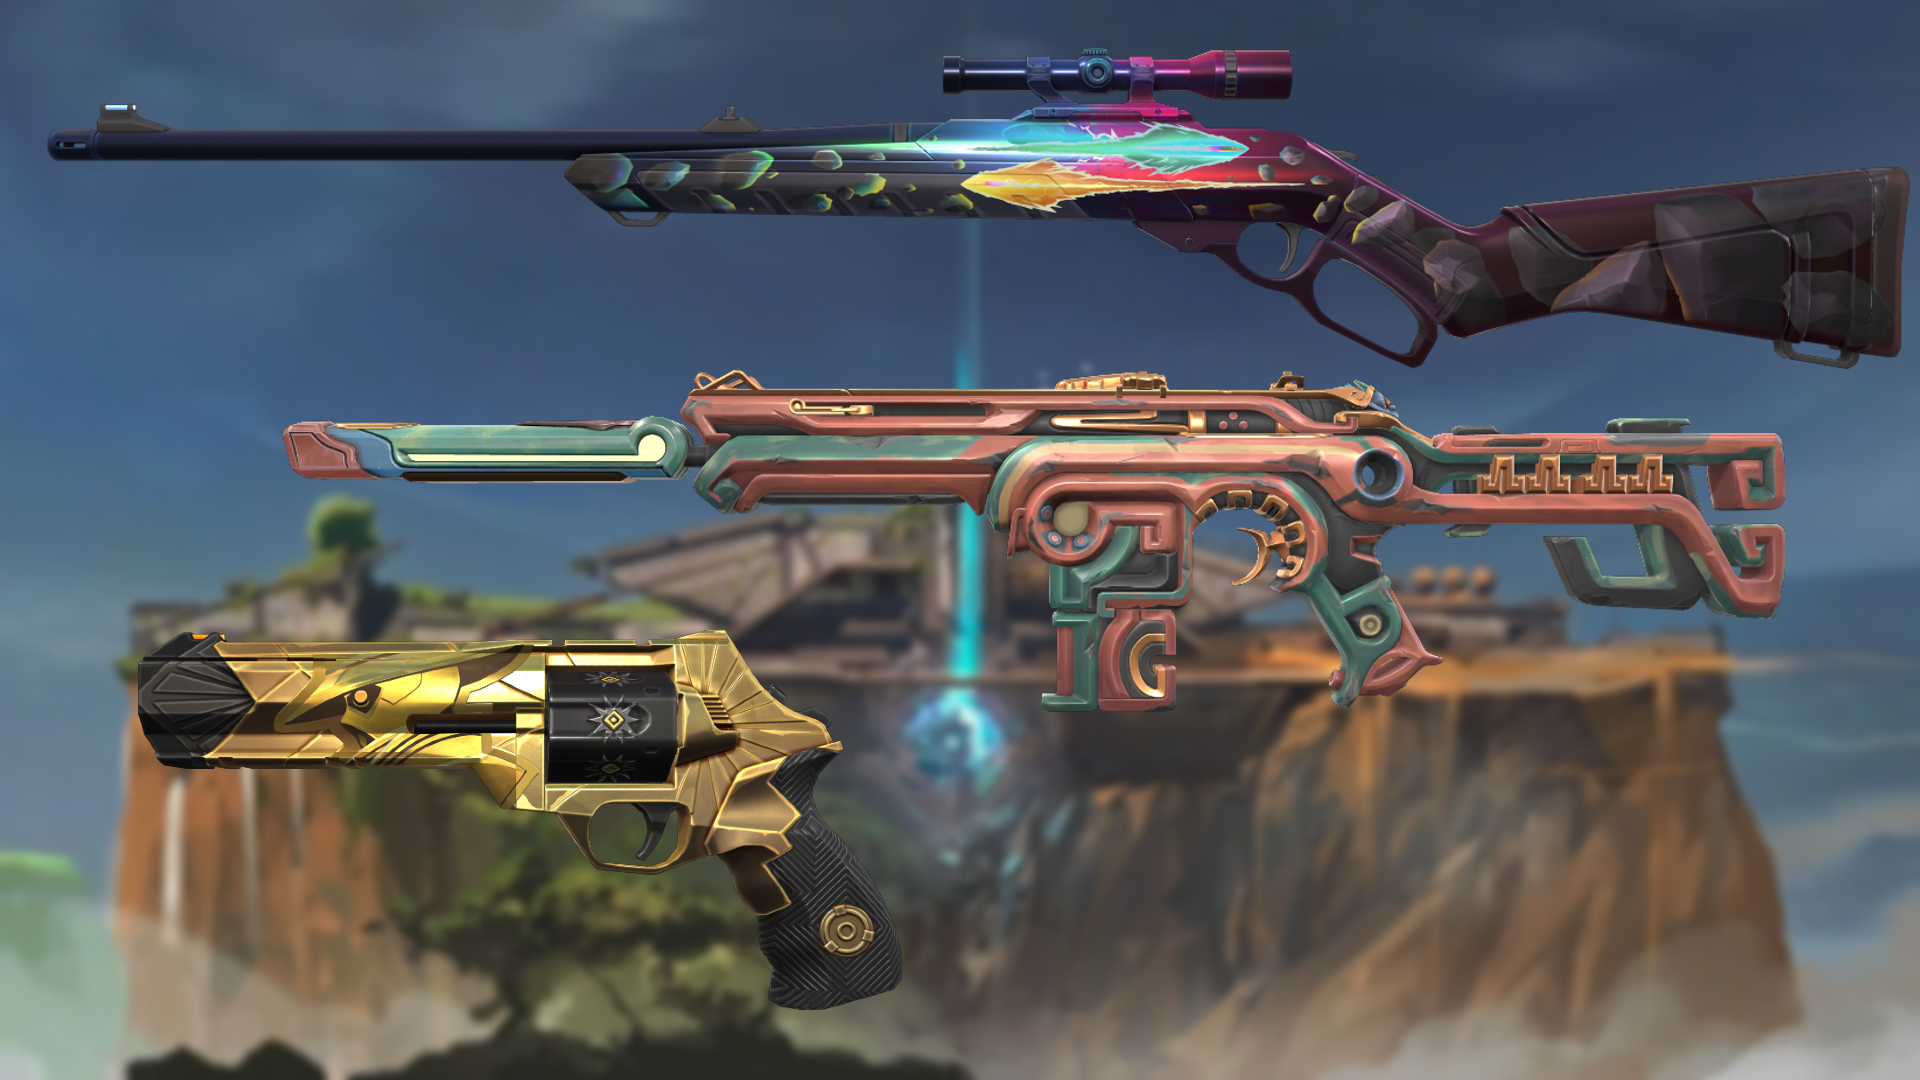 Valorant Battle Pass for Episode 5 Act 2: Skins, Cards, and Companions in Arms: This image shows some of the skins available in the Valorant Battle Pass for Episode 5 Act 2